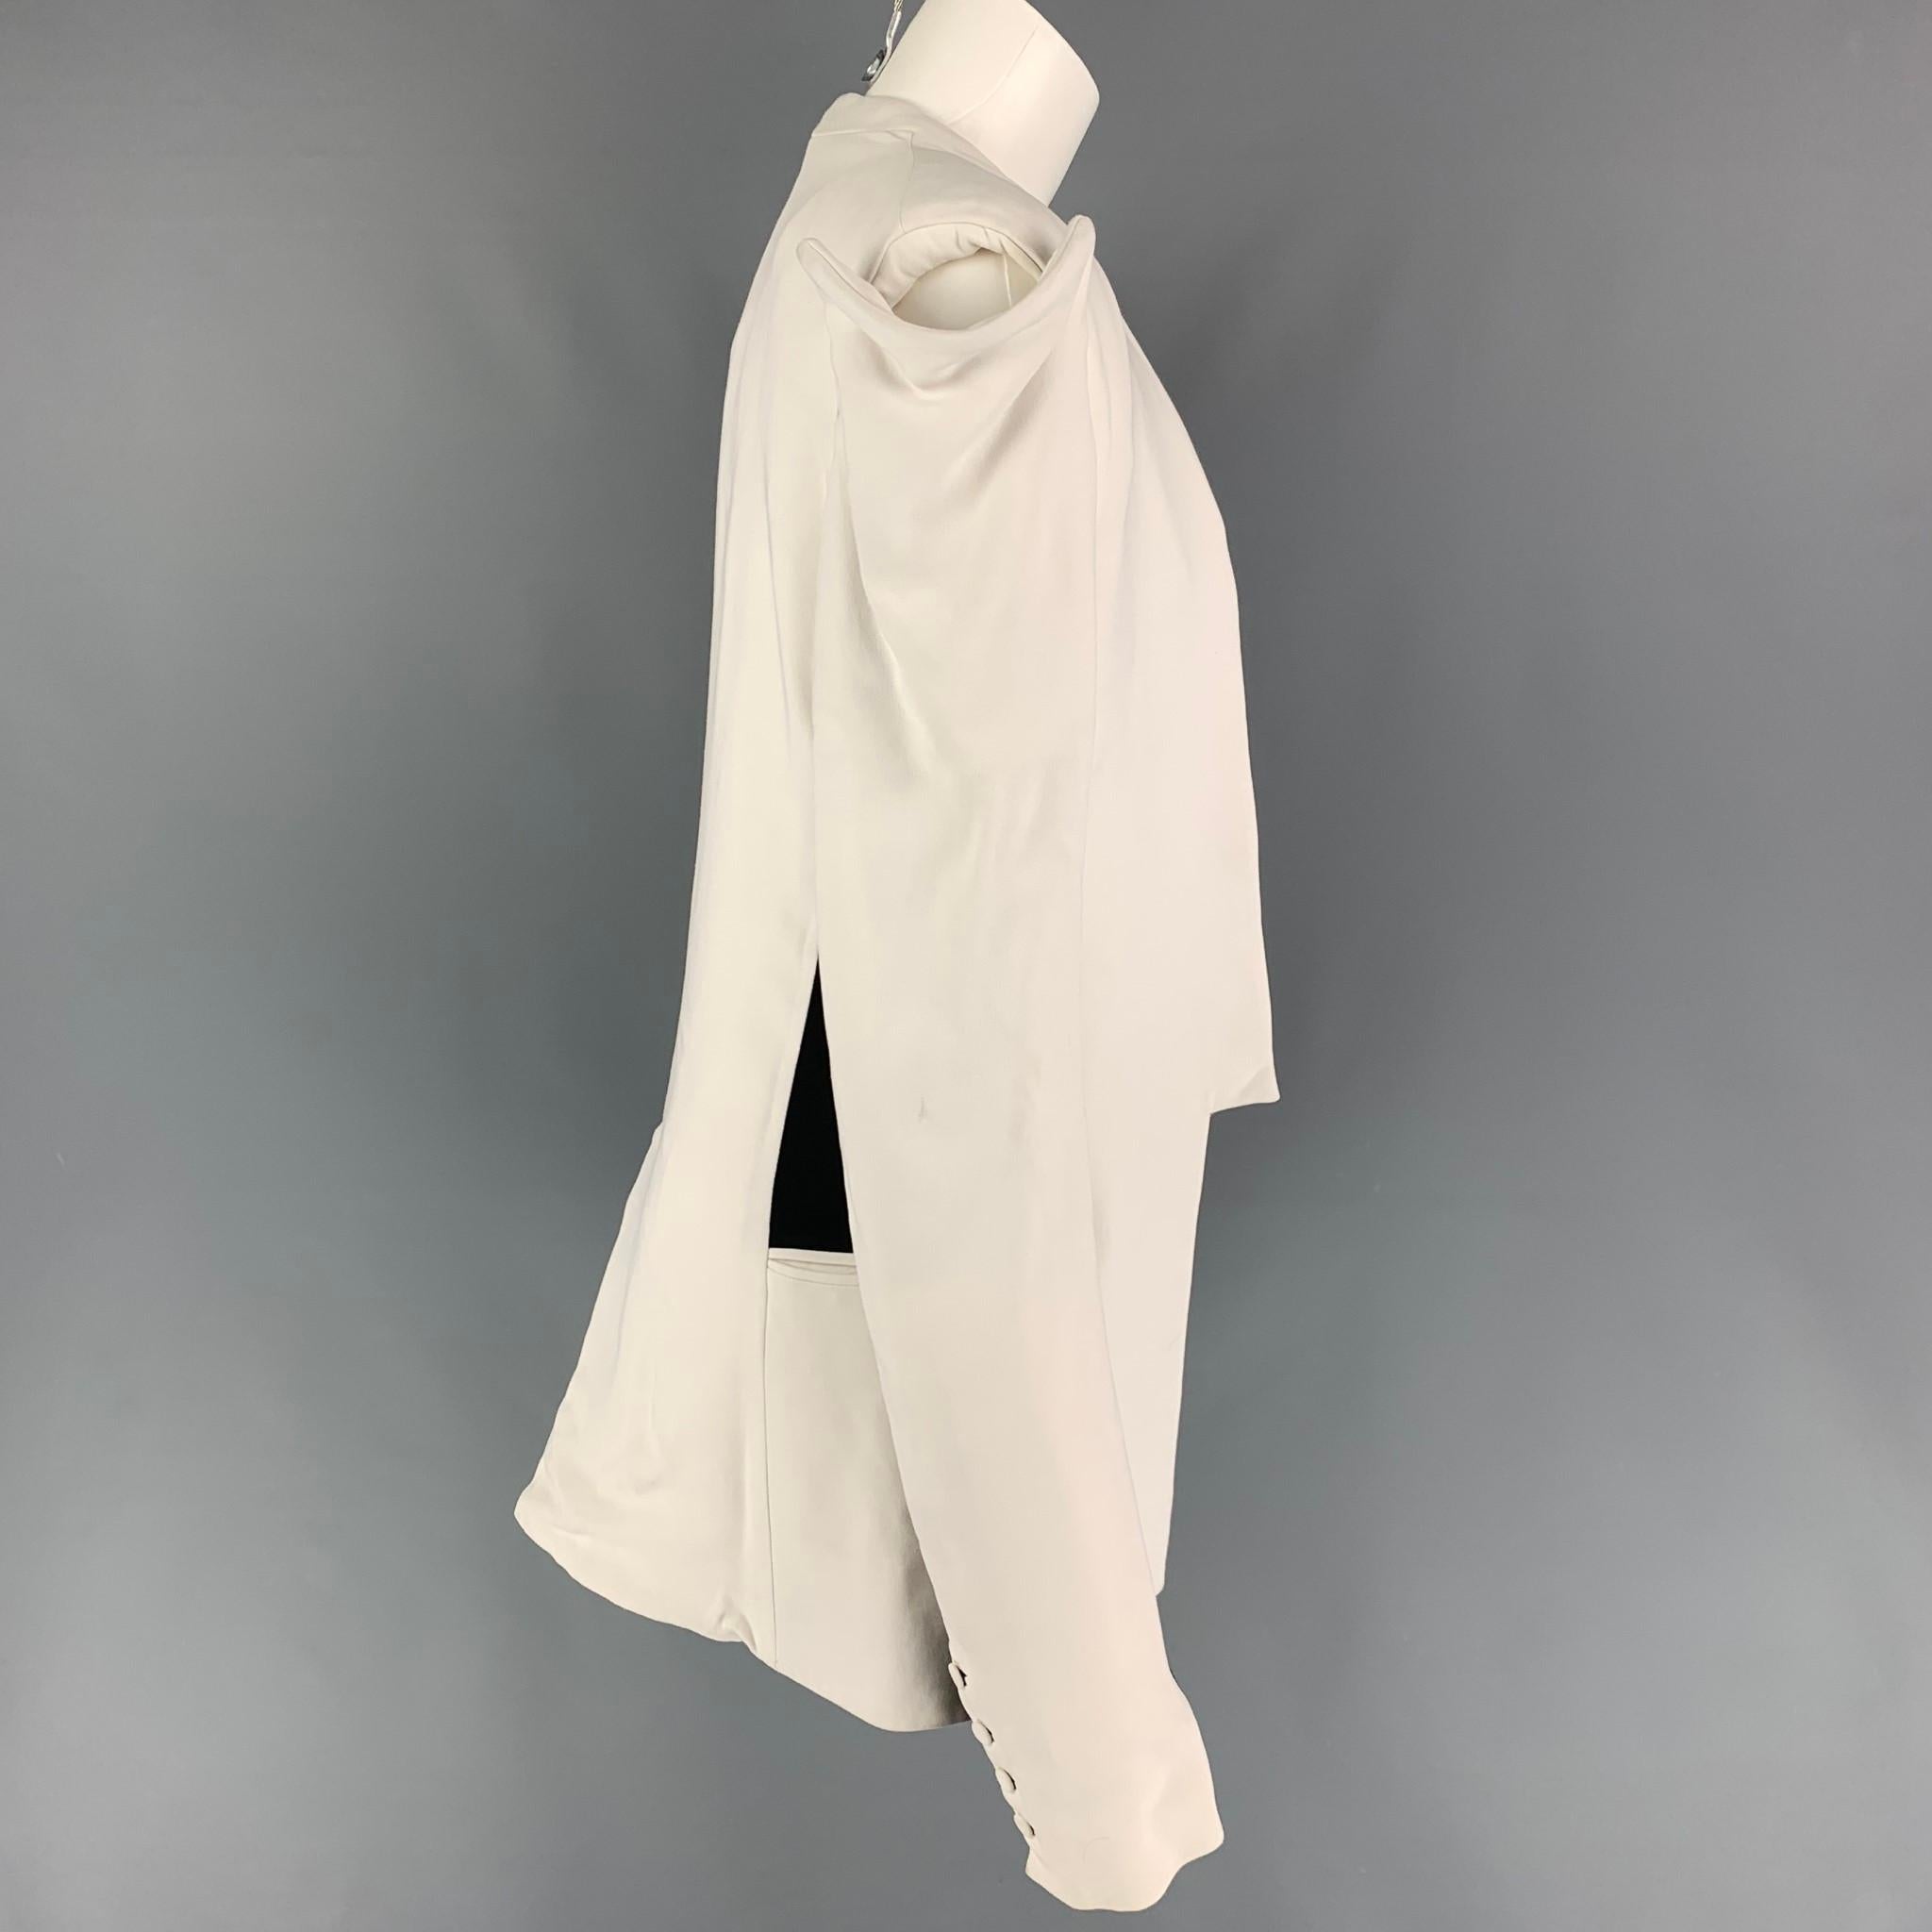 GARETH PUGH SS 2009 Debut Collection coat comes in a whit & black material featuring a elbow cut-out detail, slit pocket, single back vent, and a open front. 

Good Pre-Owned Condition. Moderate discoloration throughout. Fabric tag removed.
Marked: